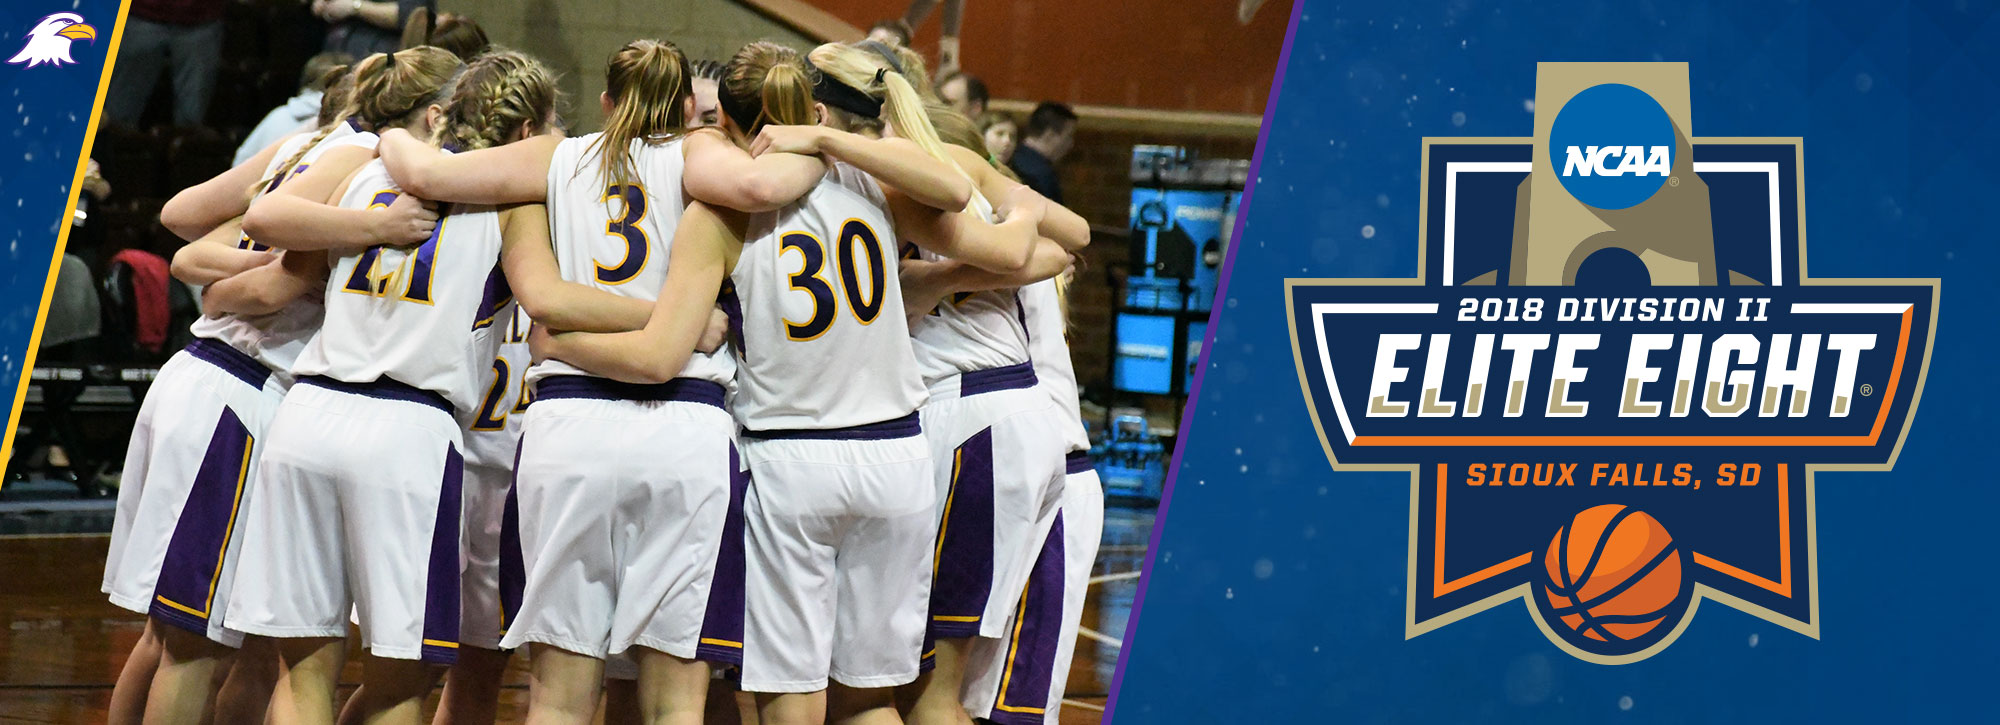 #1 Ashland Falls to #6 Central Missouri 66-52 in National Championship